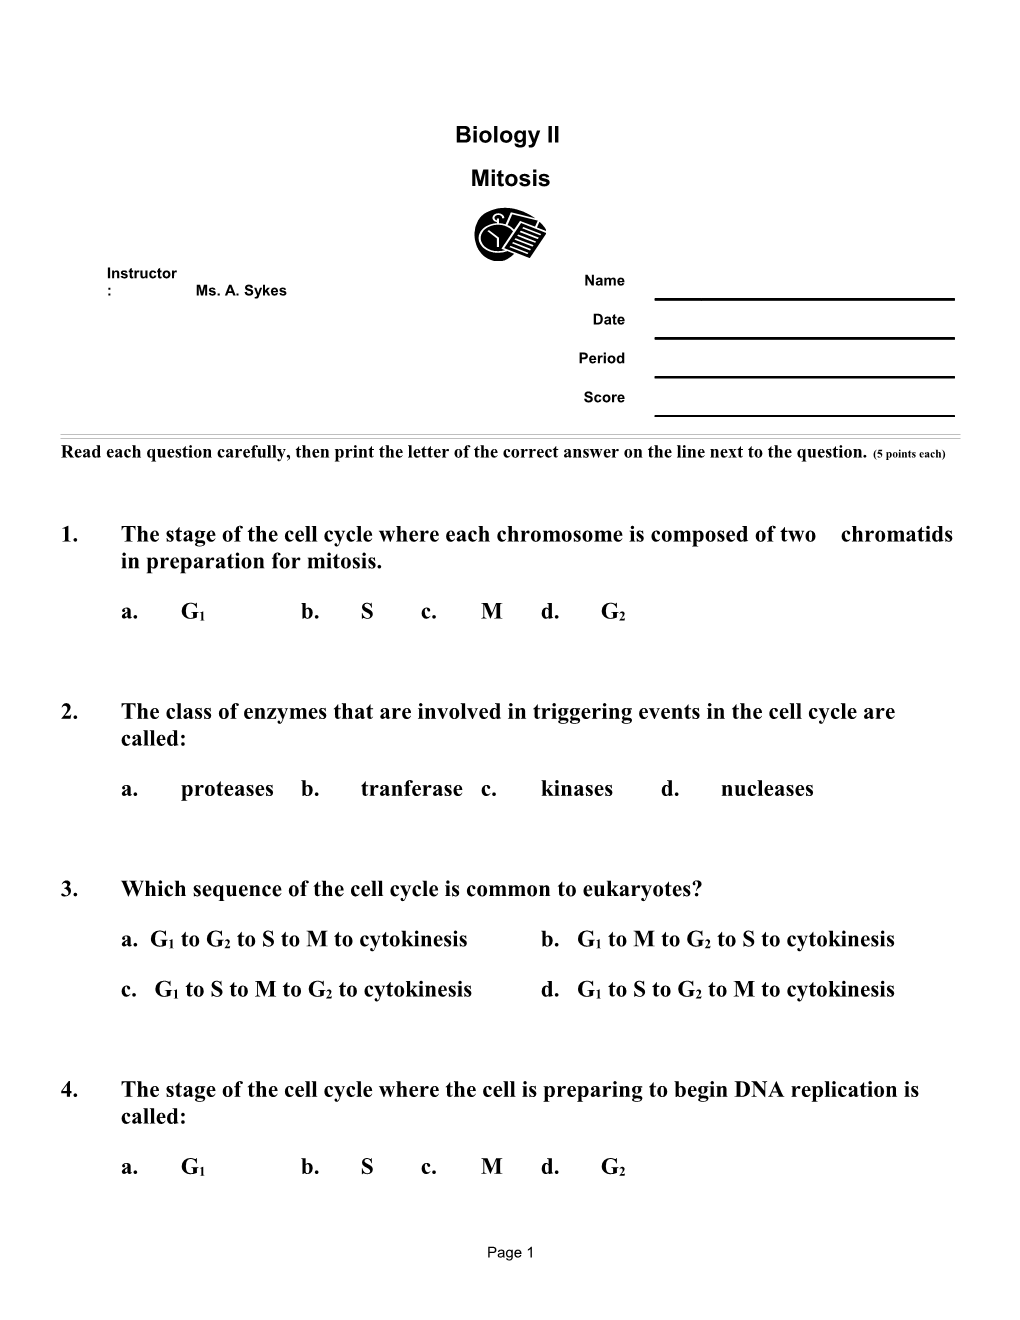 Read Each Question Carefully, Then Print the Letter of the Correct Answer on the Line